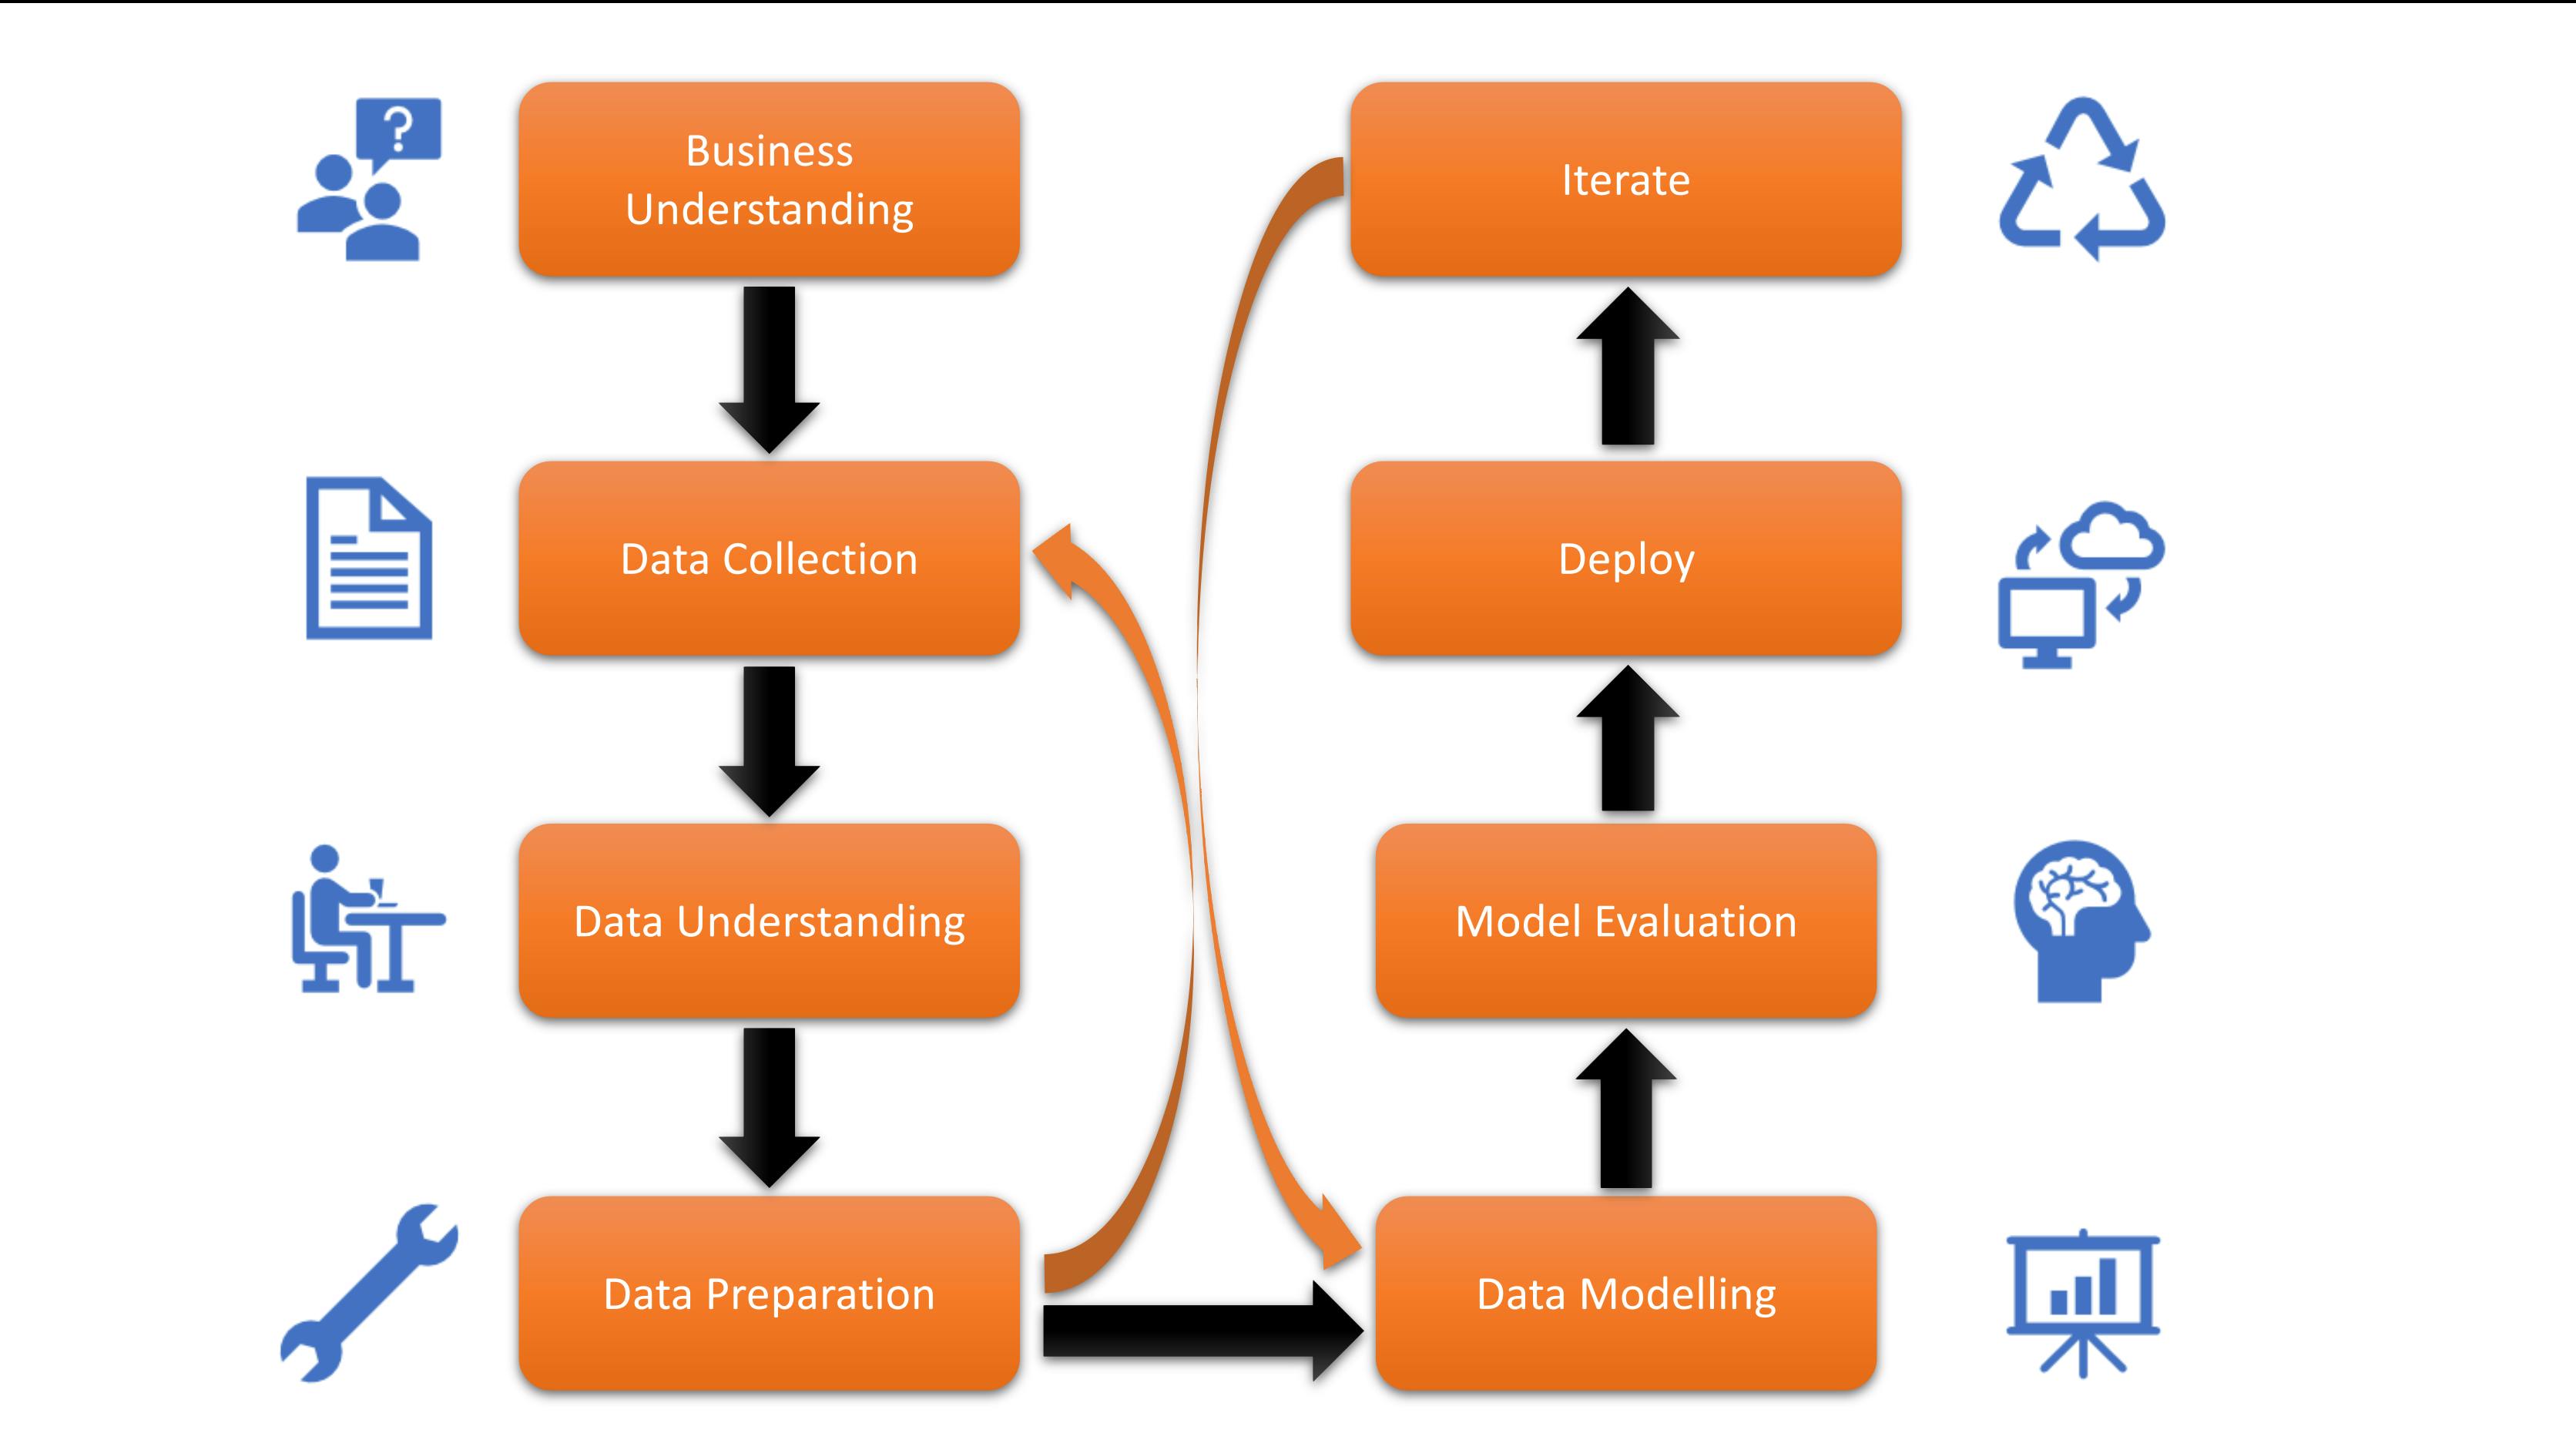 Steps involved in a Data Science Project